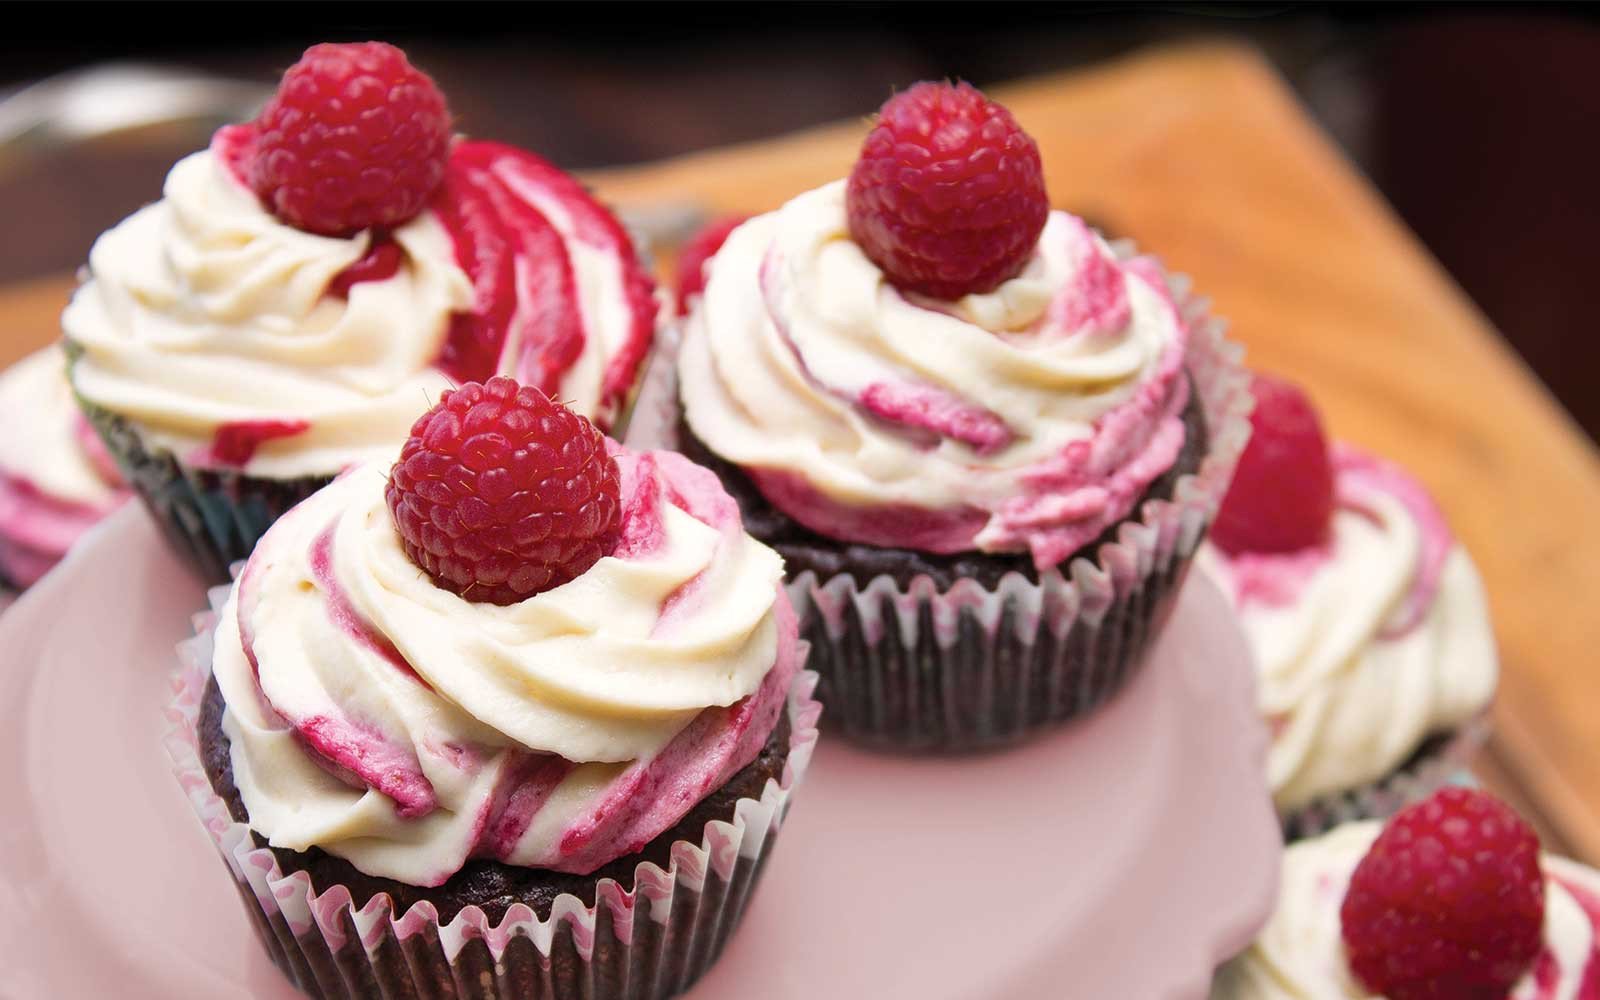 Chocolate Cupcakes with Raspberry Cream Cheese Icing - Nutracelle